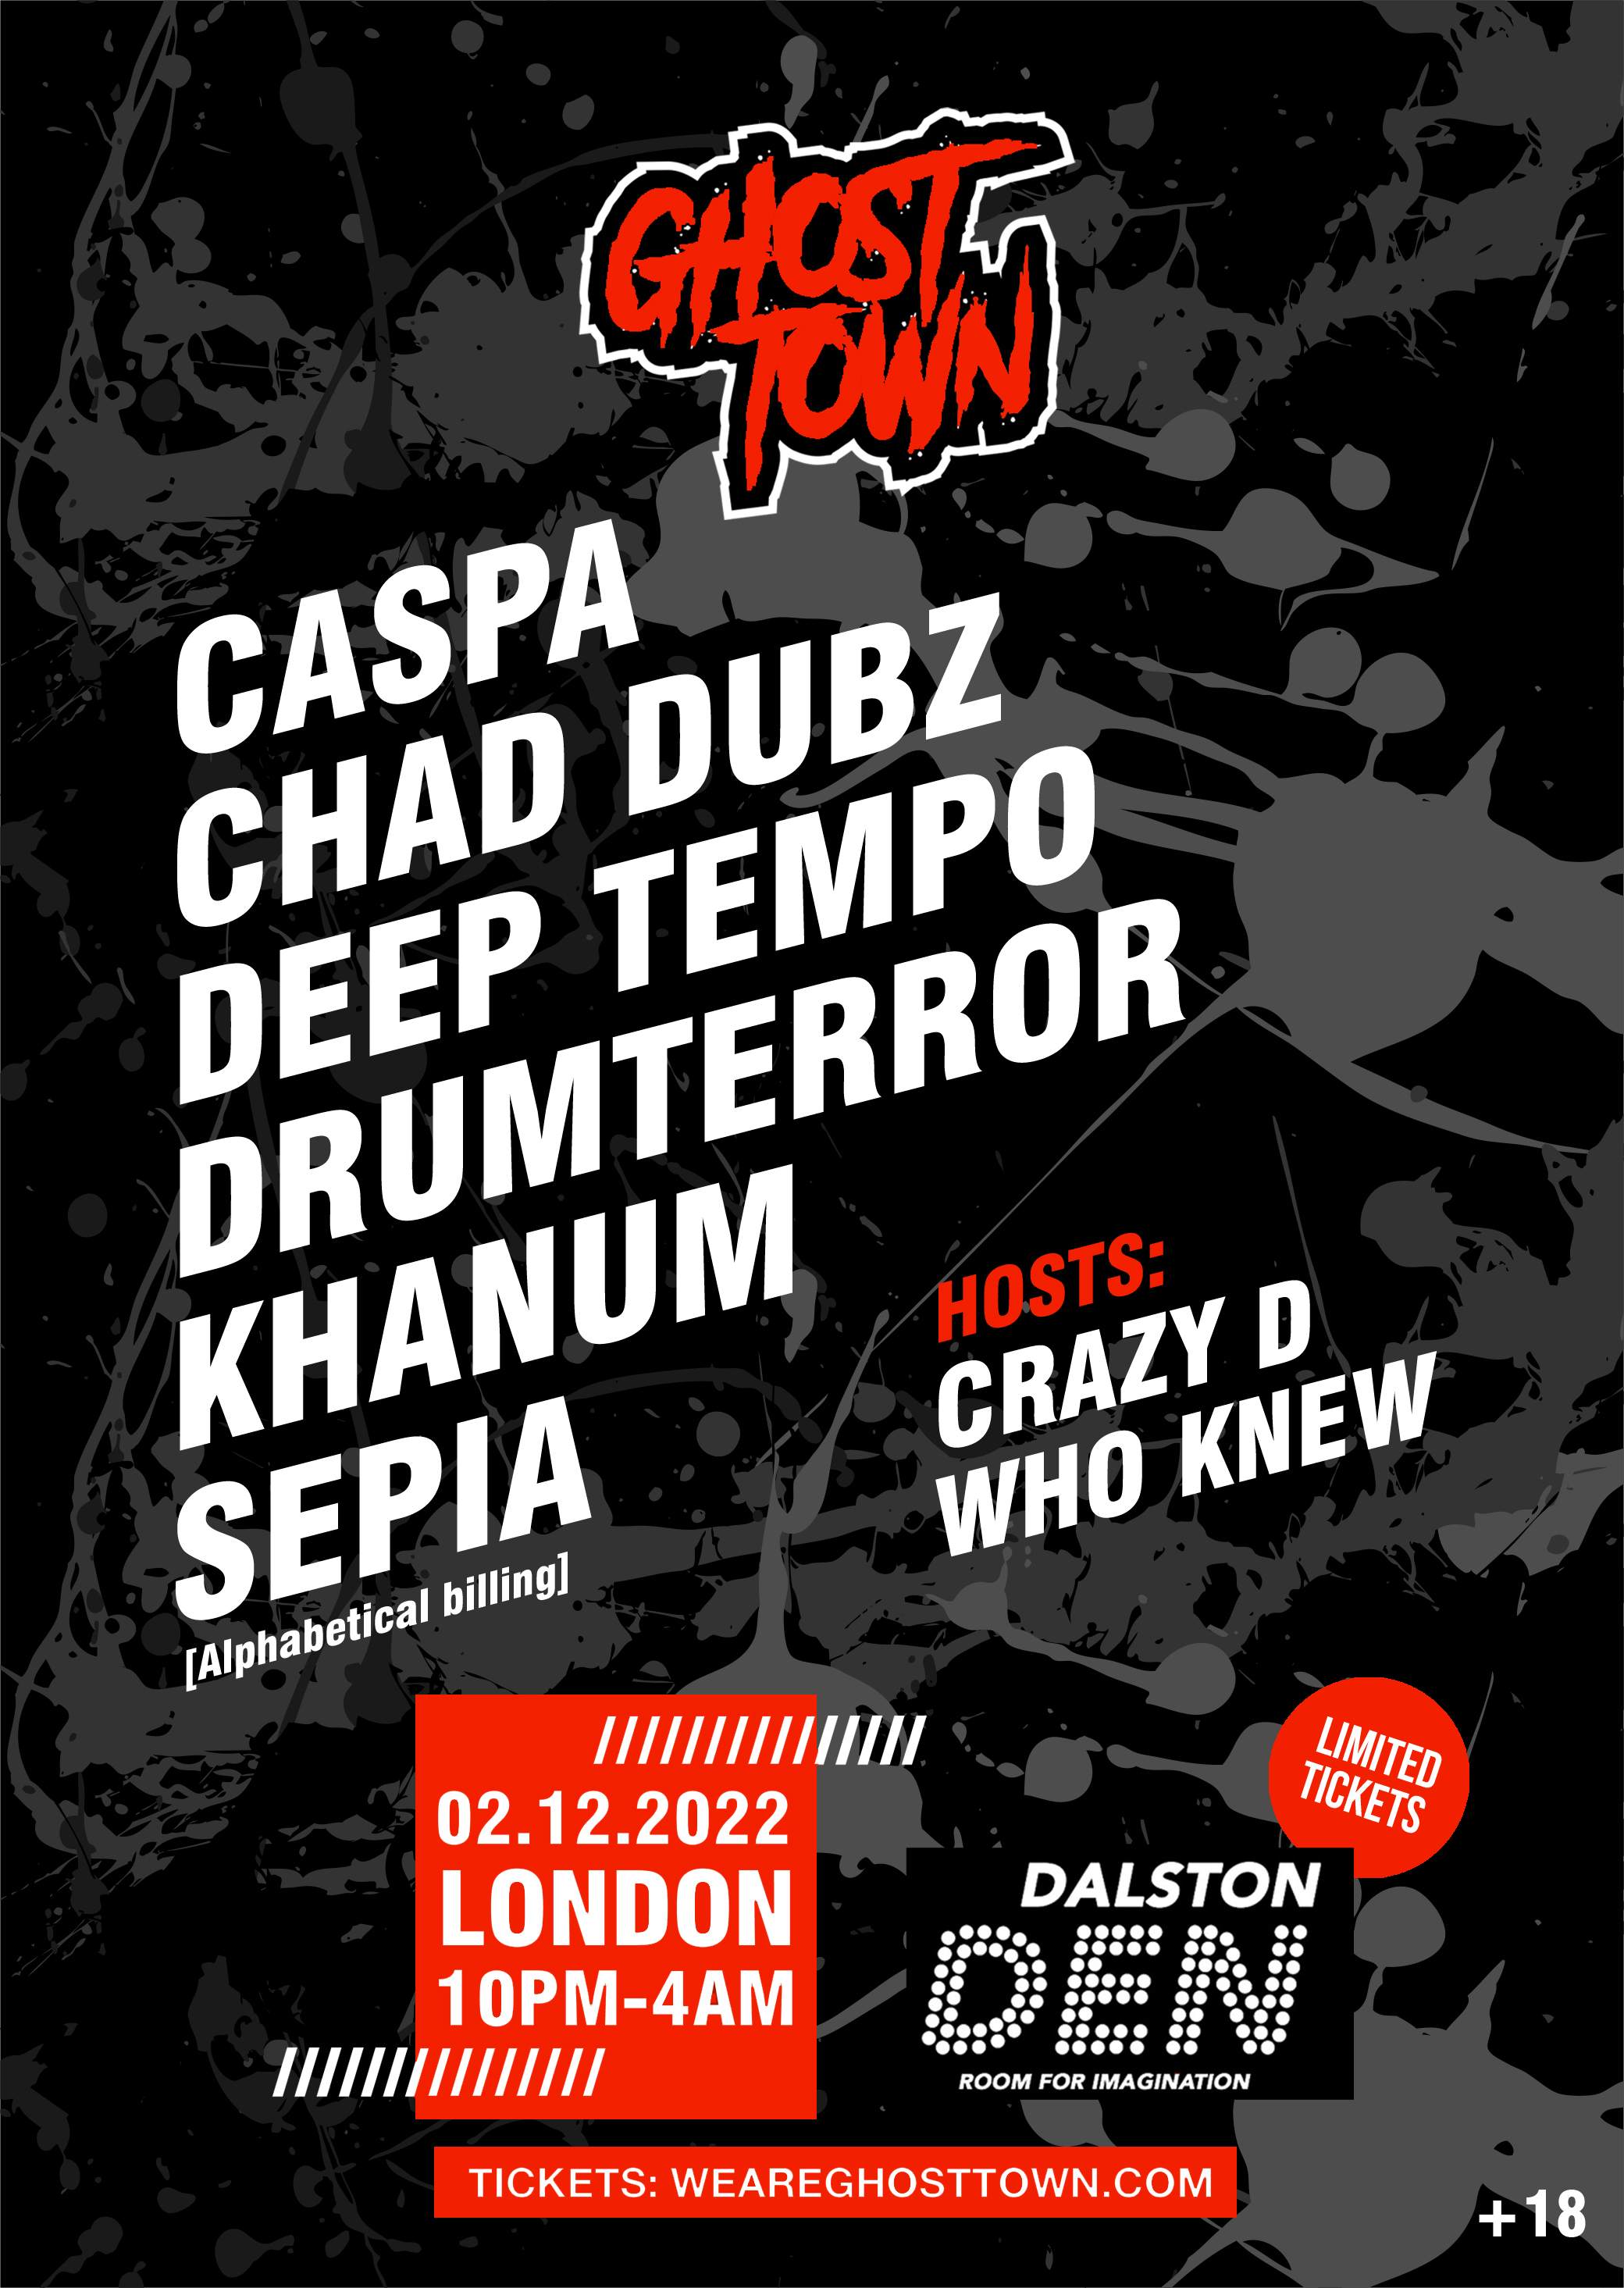 Dubstep London Party [Ghost Town] 02.12.2022 - Página frontal